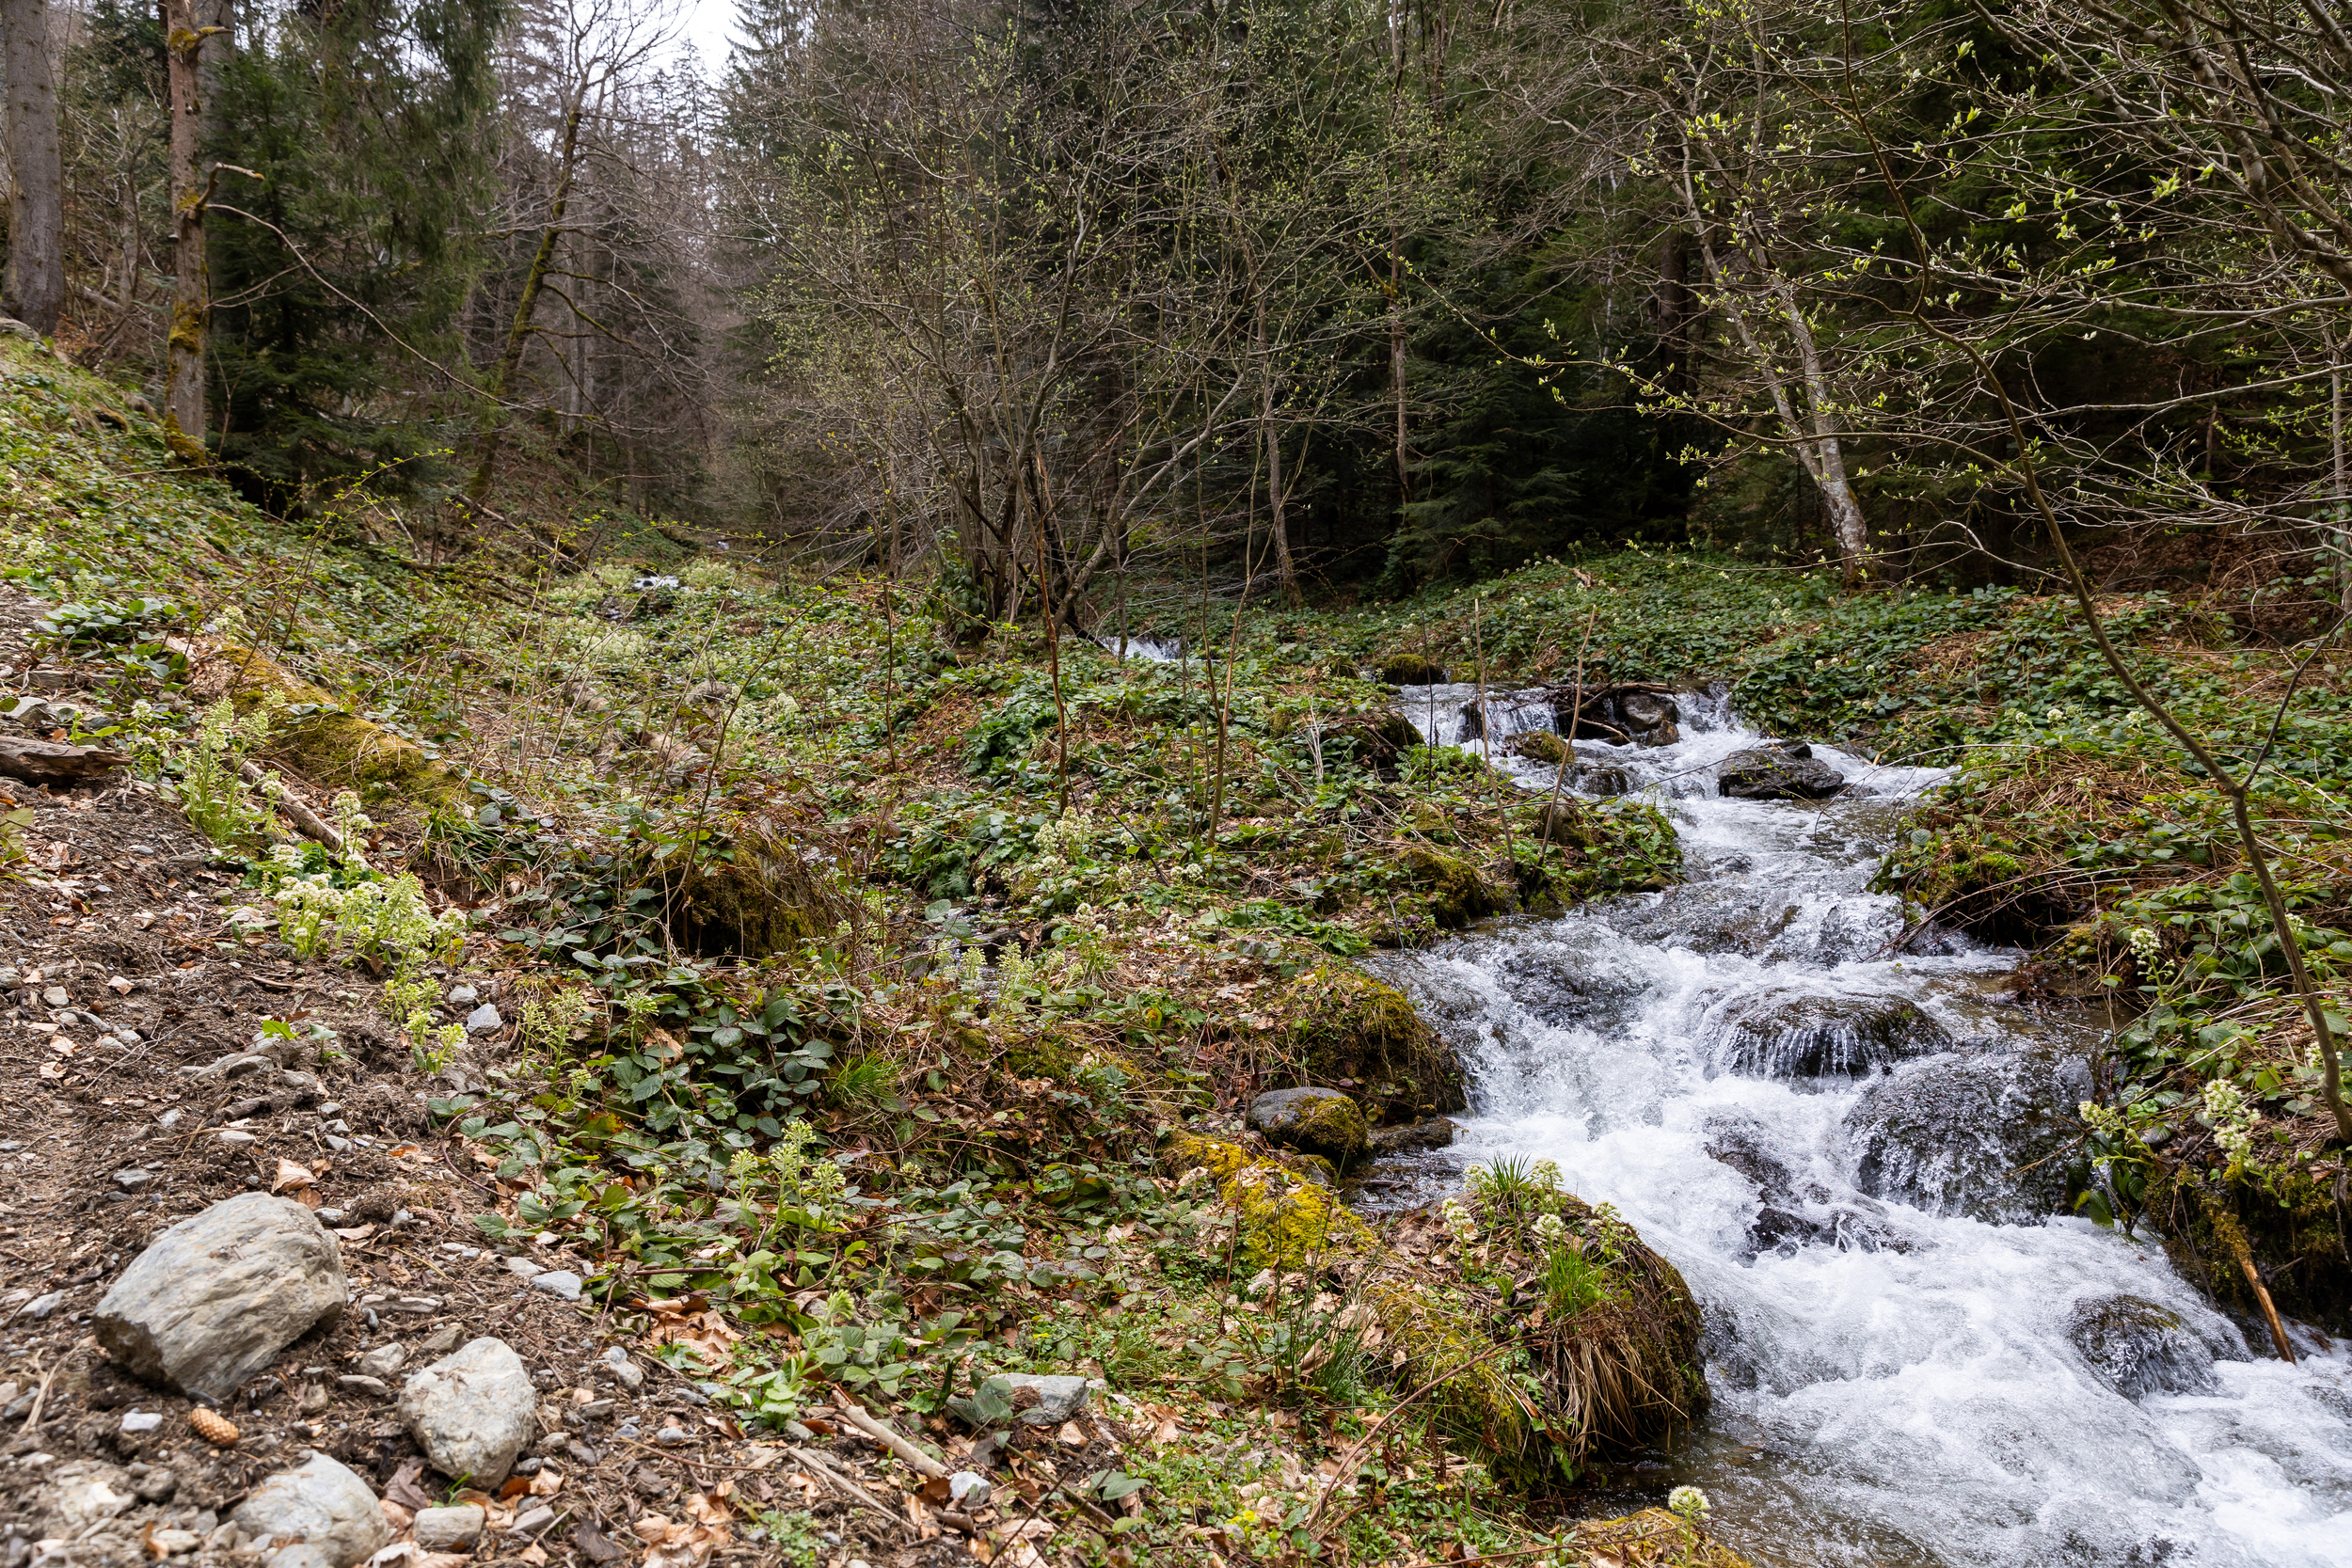 A stream flows through trees and vegetation in an old-growth forest in the Romanian Carpathians (Greenpeace/PA)